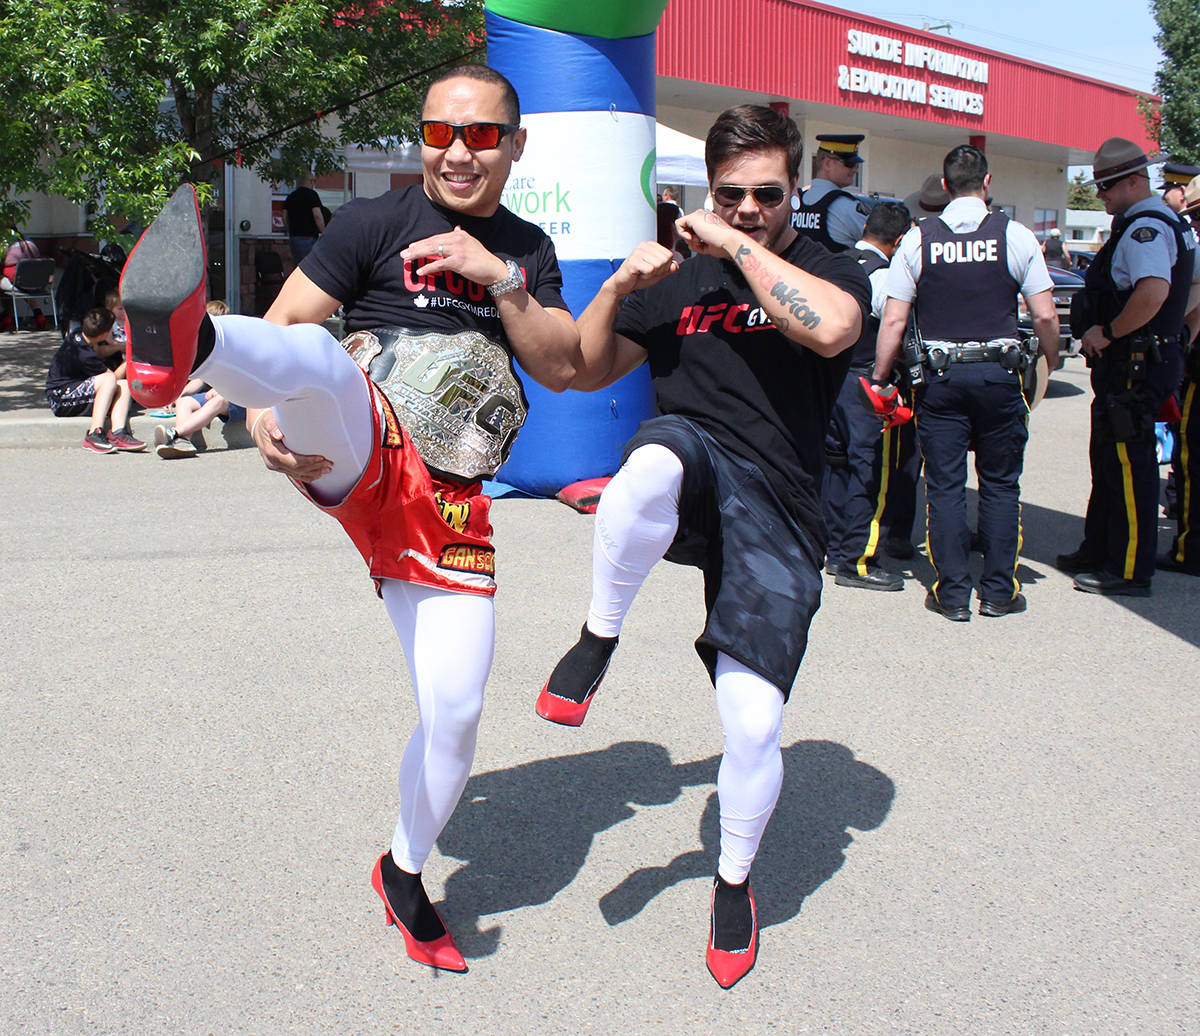 POWER IN NUMBERS - Steve Grandeza and Russell Decoteau of the UFC Gym took part in the Walk A Mile In Her Shoes event. Carlie Connolly/Red Deer Express